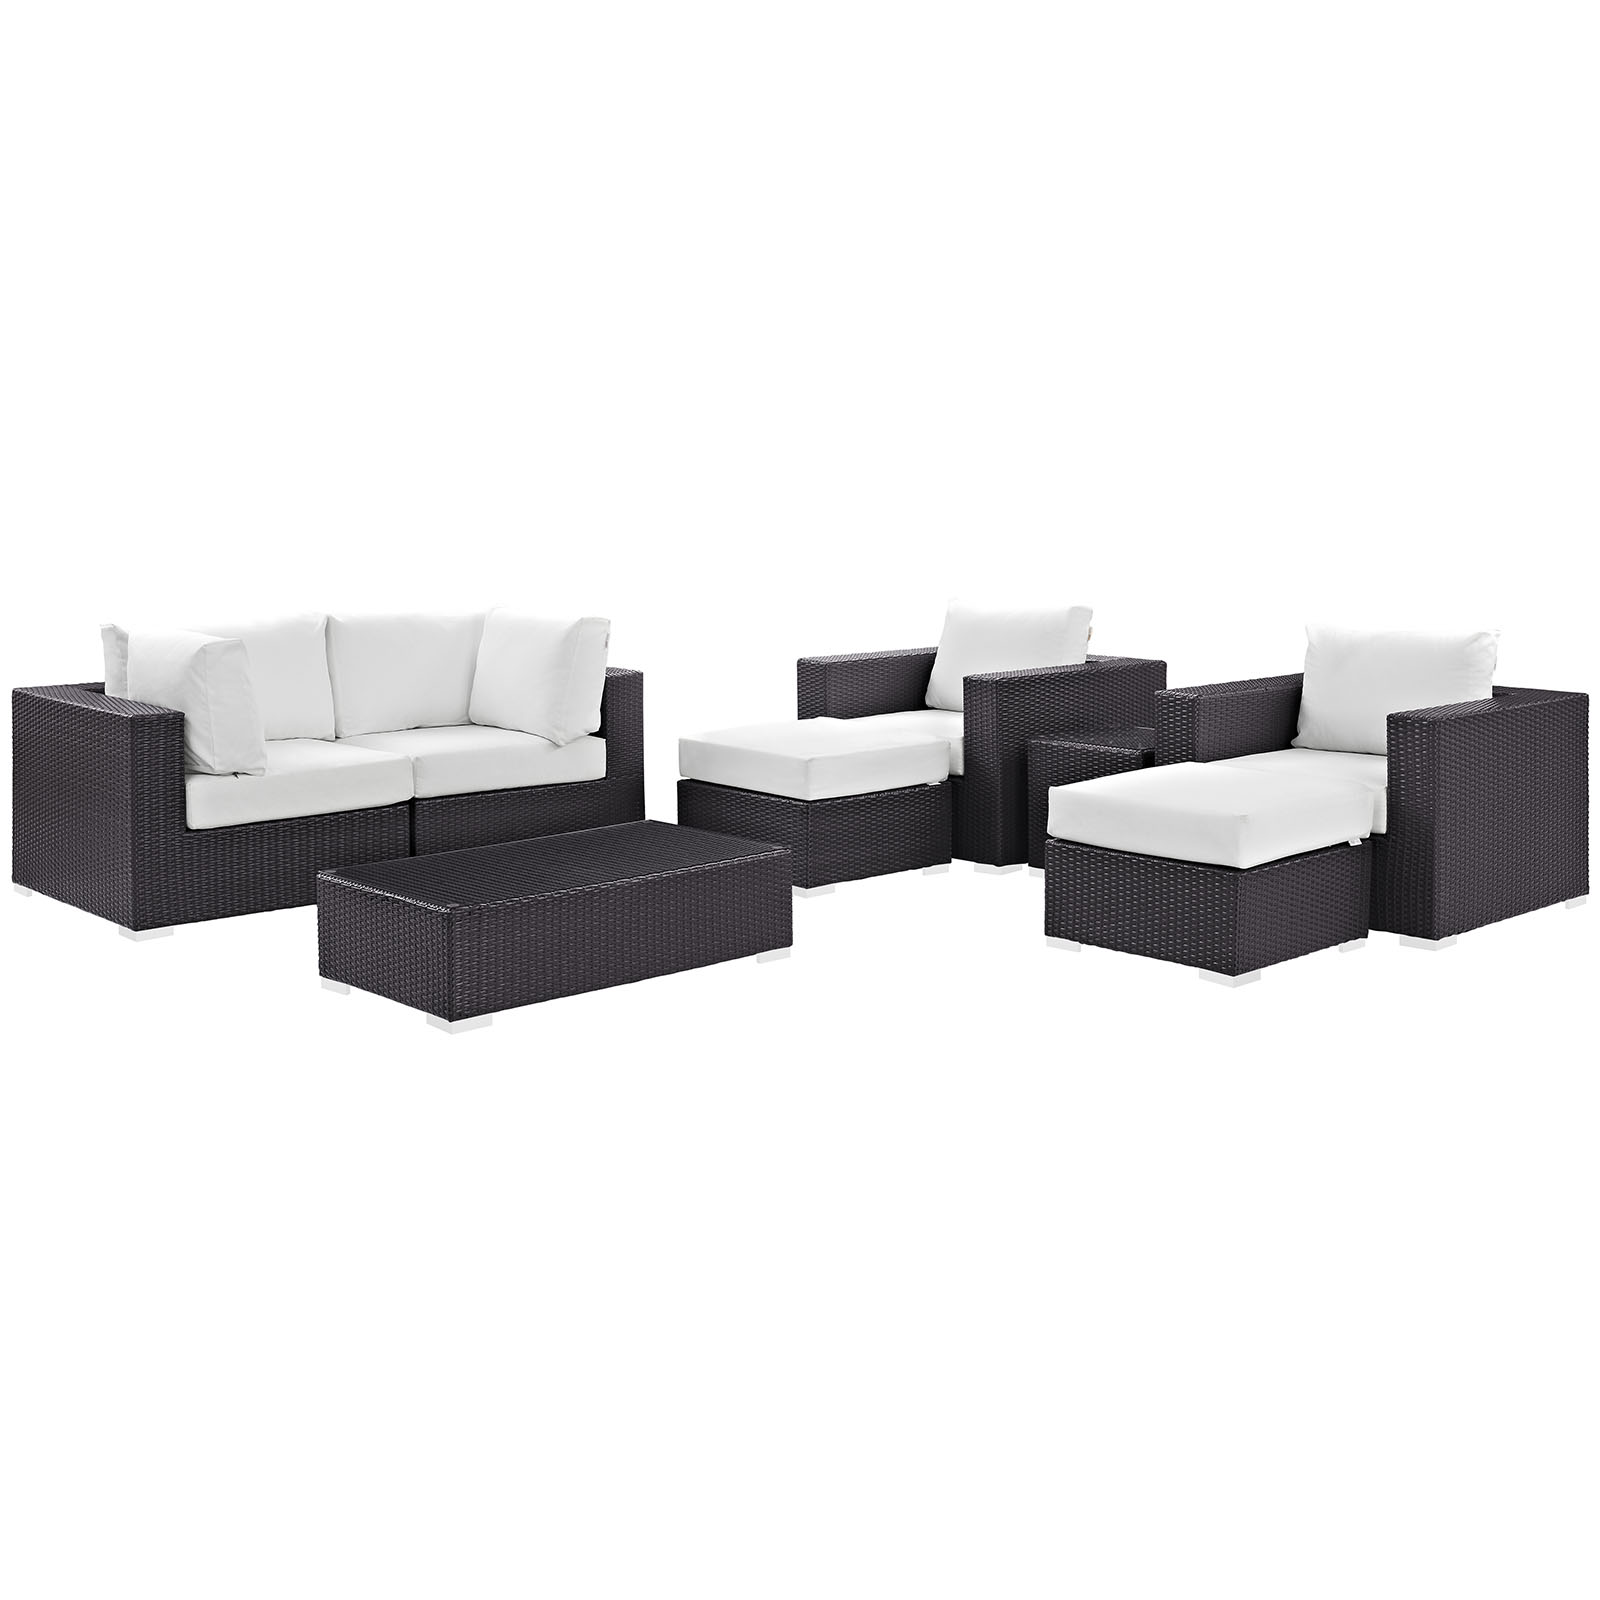 Modway Convene 8 Piece Outdoor Patio Sectional Set in Espresso White - image 2 of 11